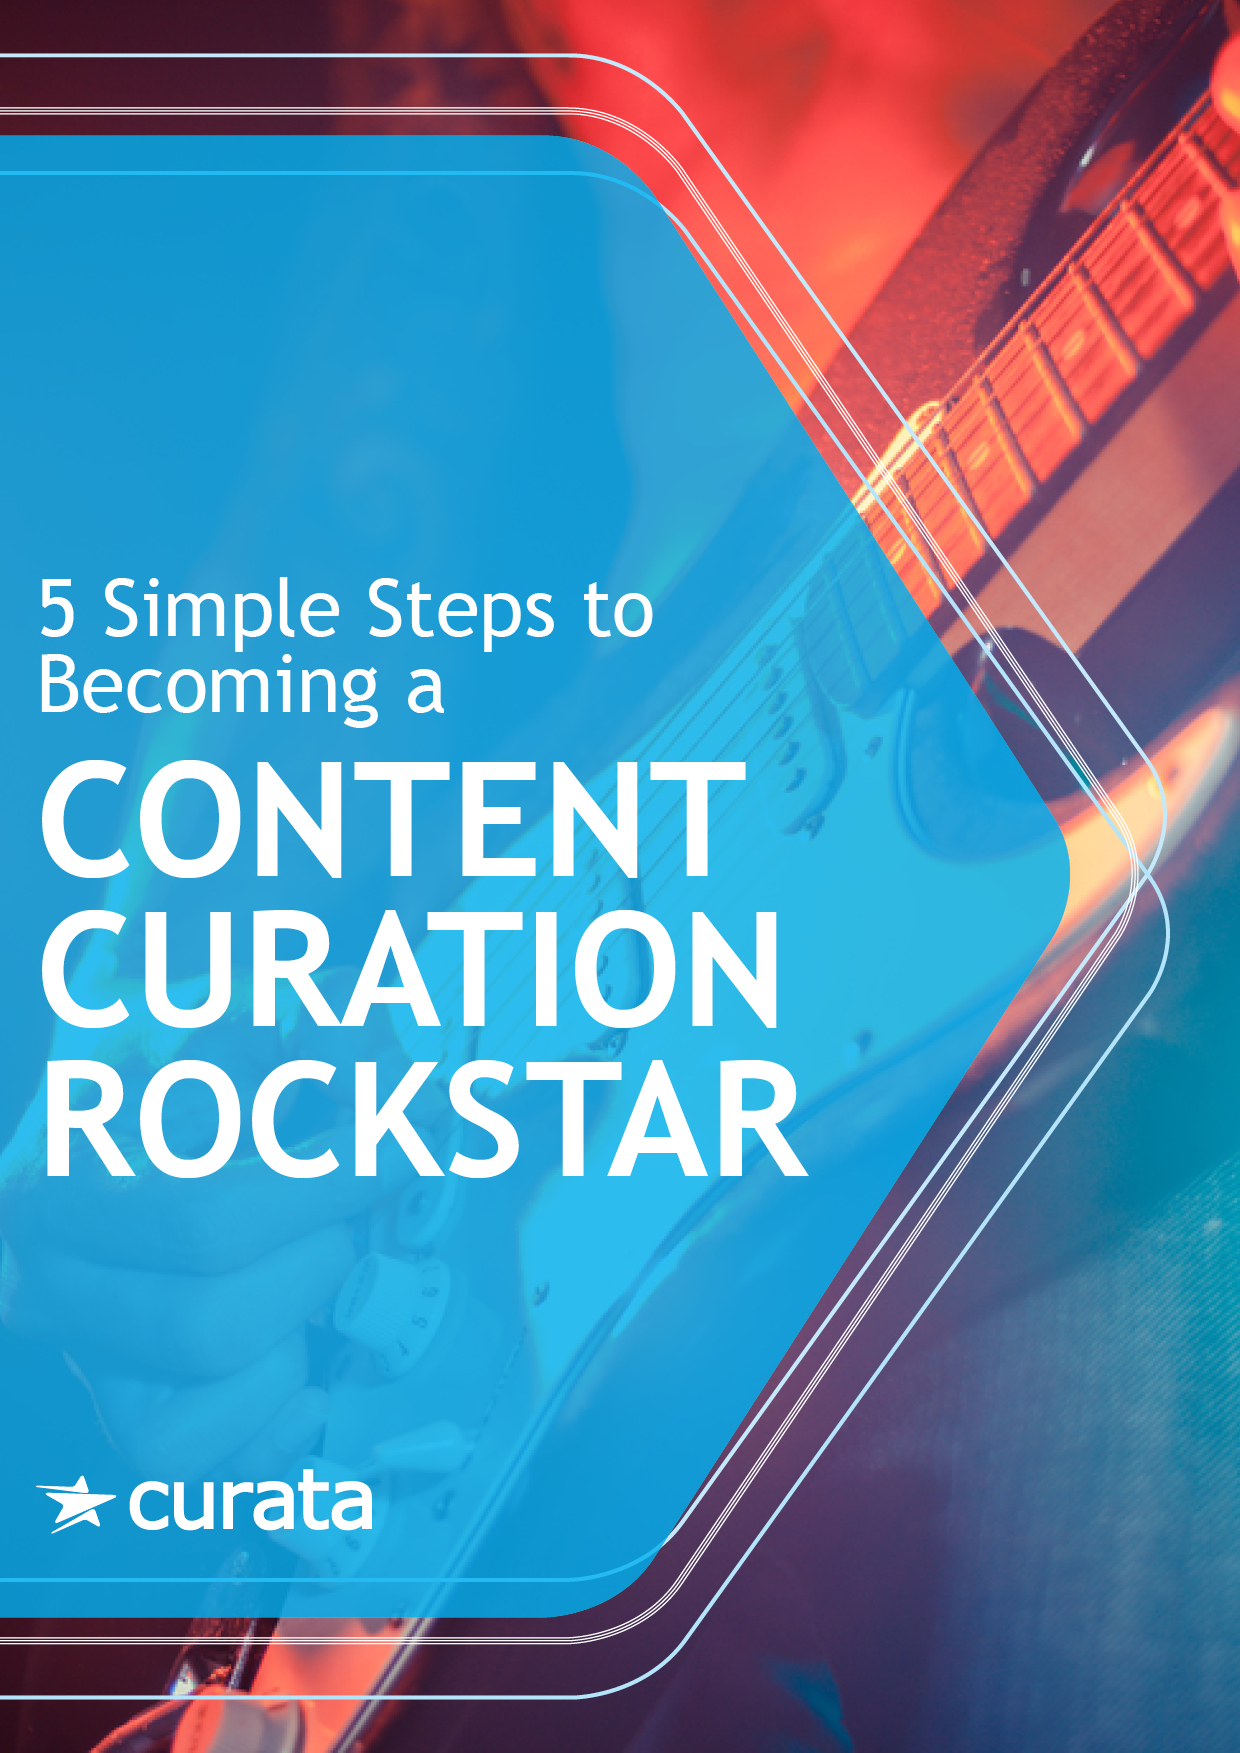 5 Simple Steps to Becoming a Content Curation Rockstar